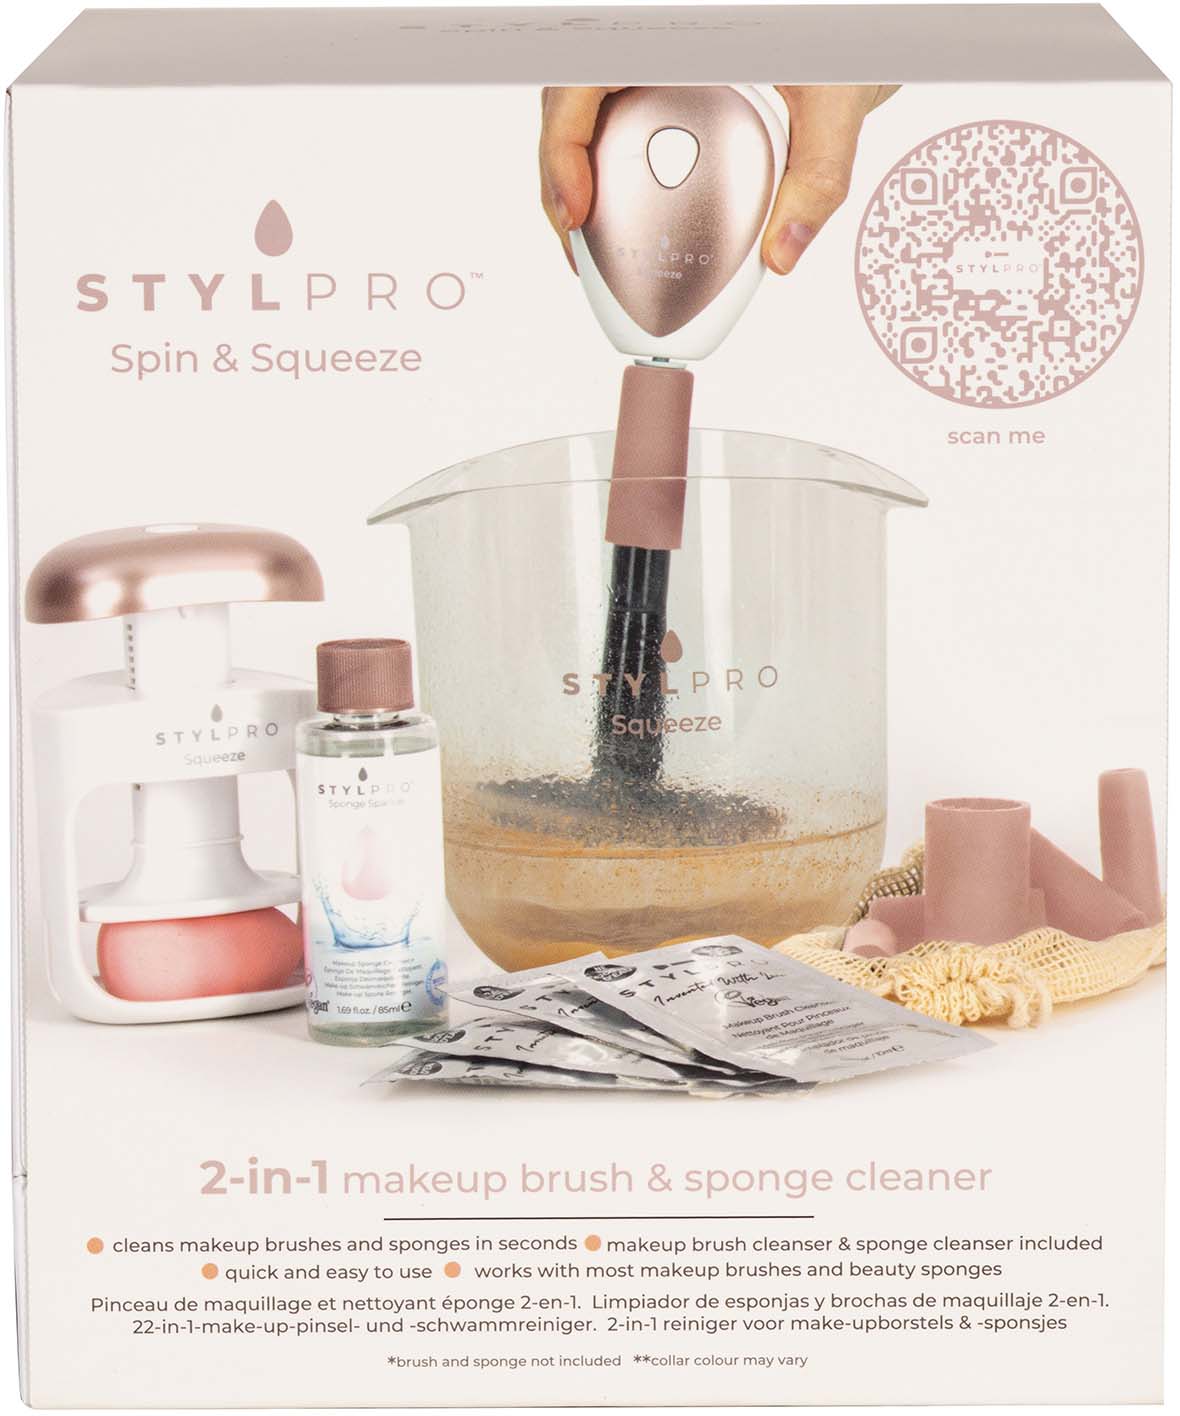 https://lyko.com/globalassets/product-images/stylpro-spin-and-squeeze-2-in-1-makeup-brush--sponge-cleaner-3556-118-0000_1.jpg?ref=6A4E50648B